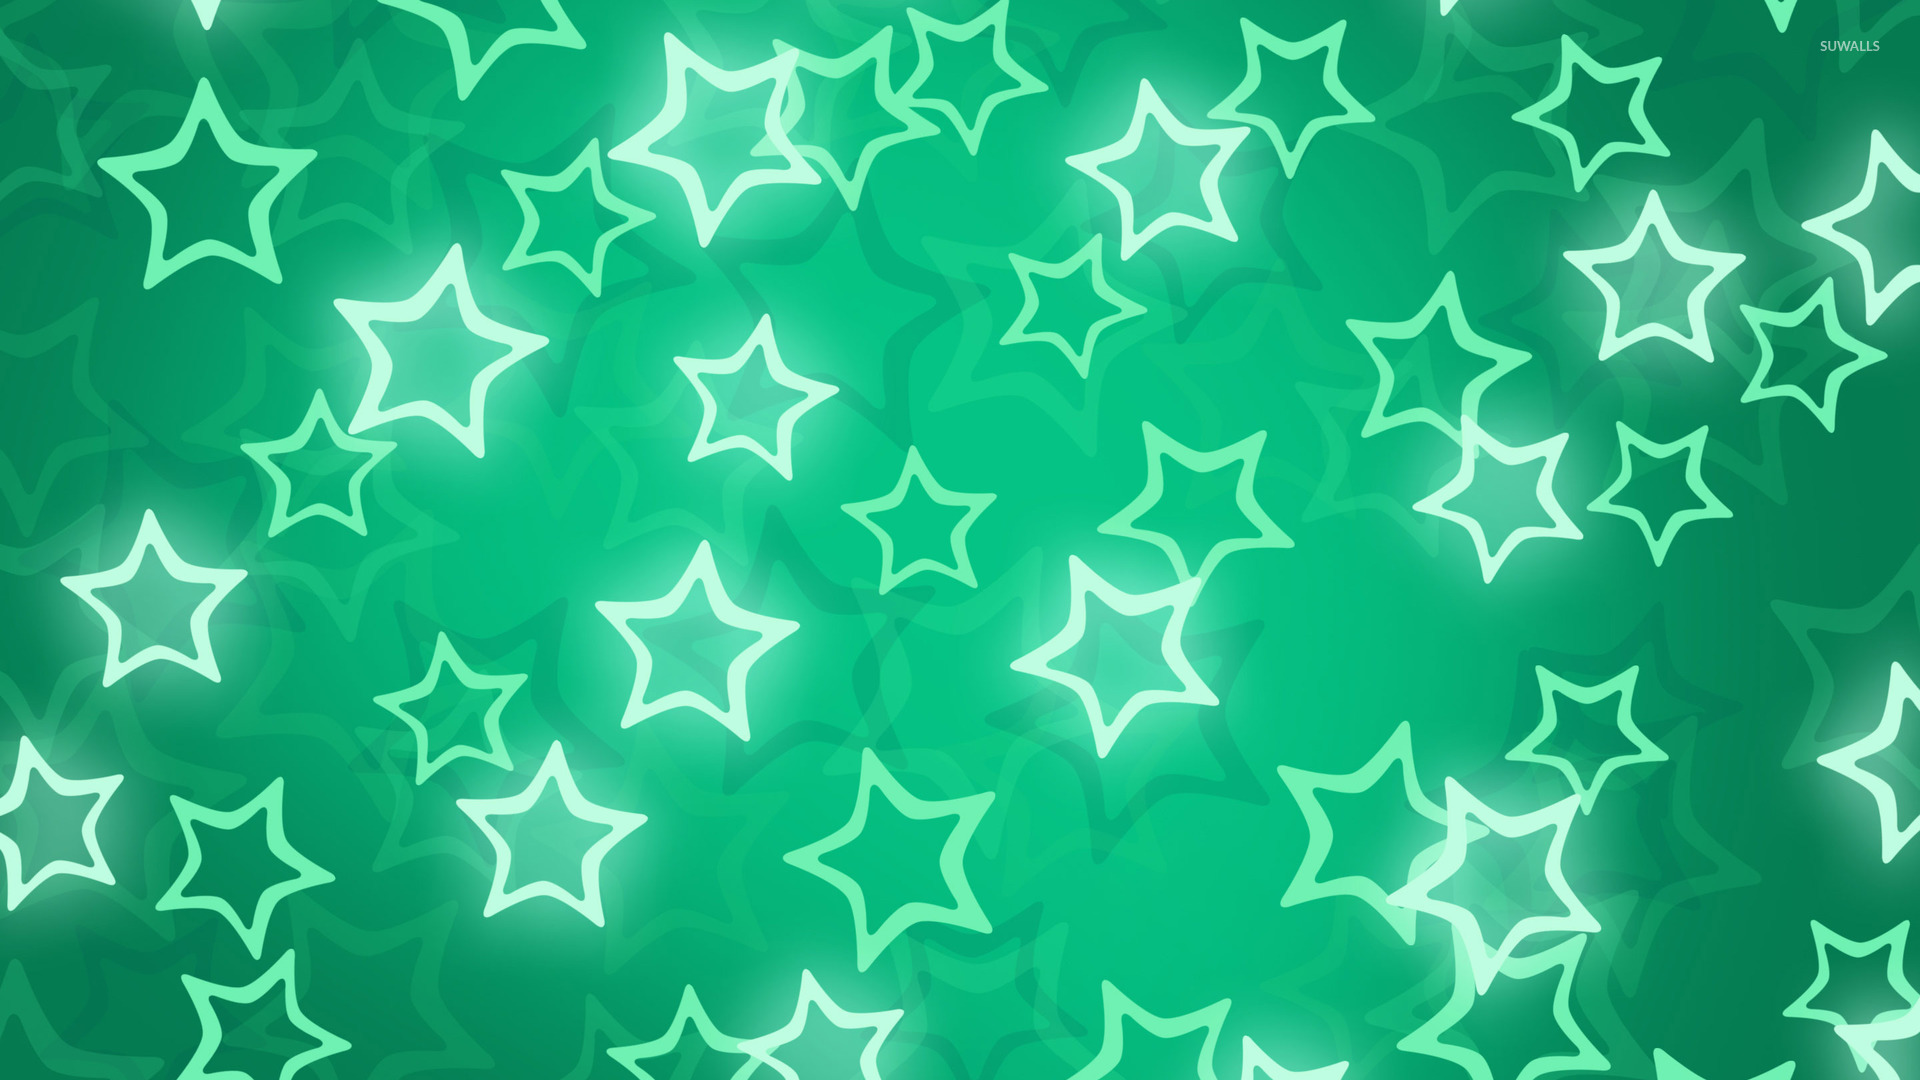 Glowing star pattern wallpaper - Abstract wallpapers - #23777